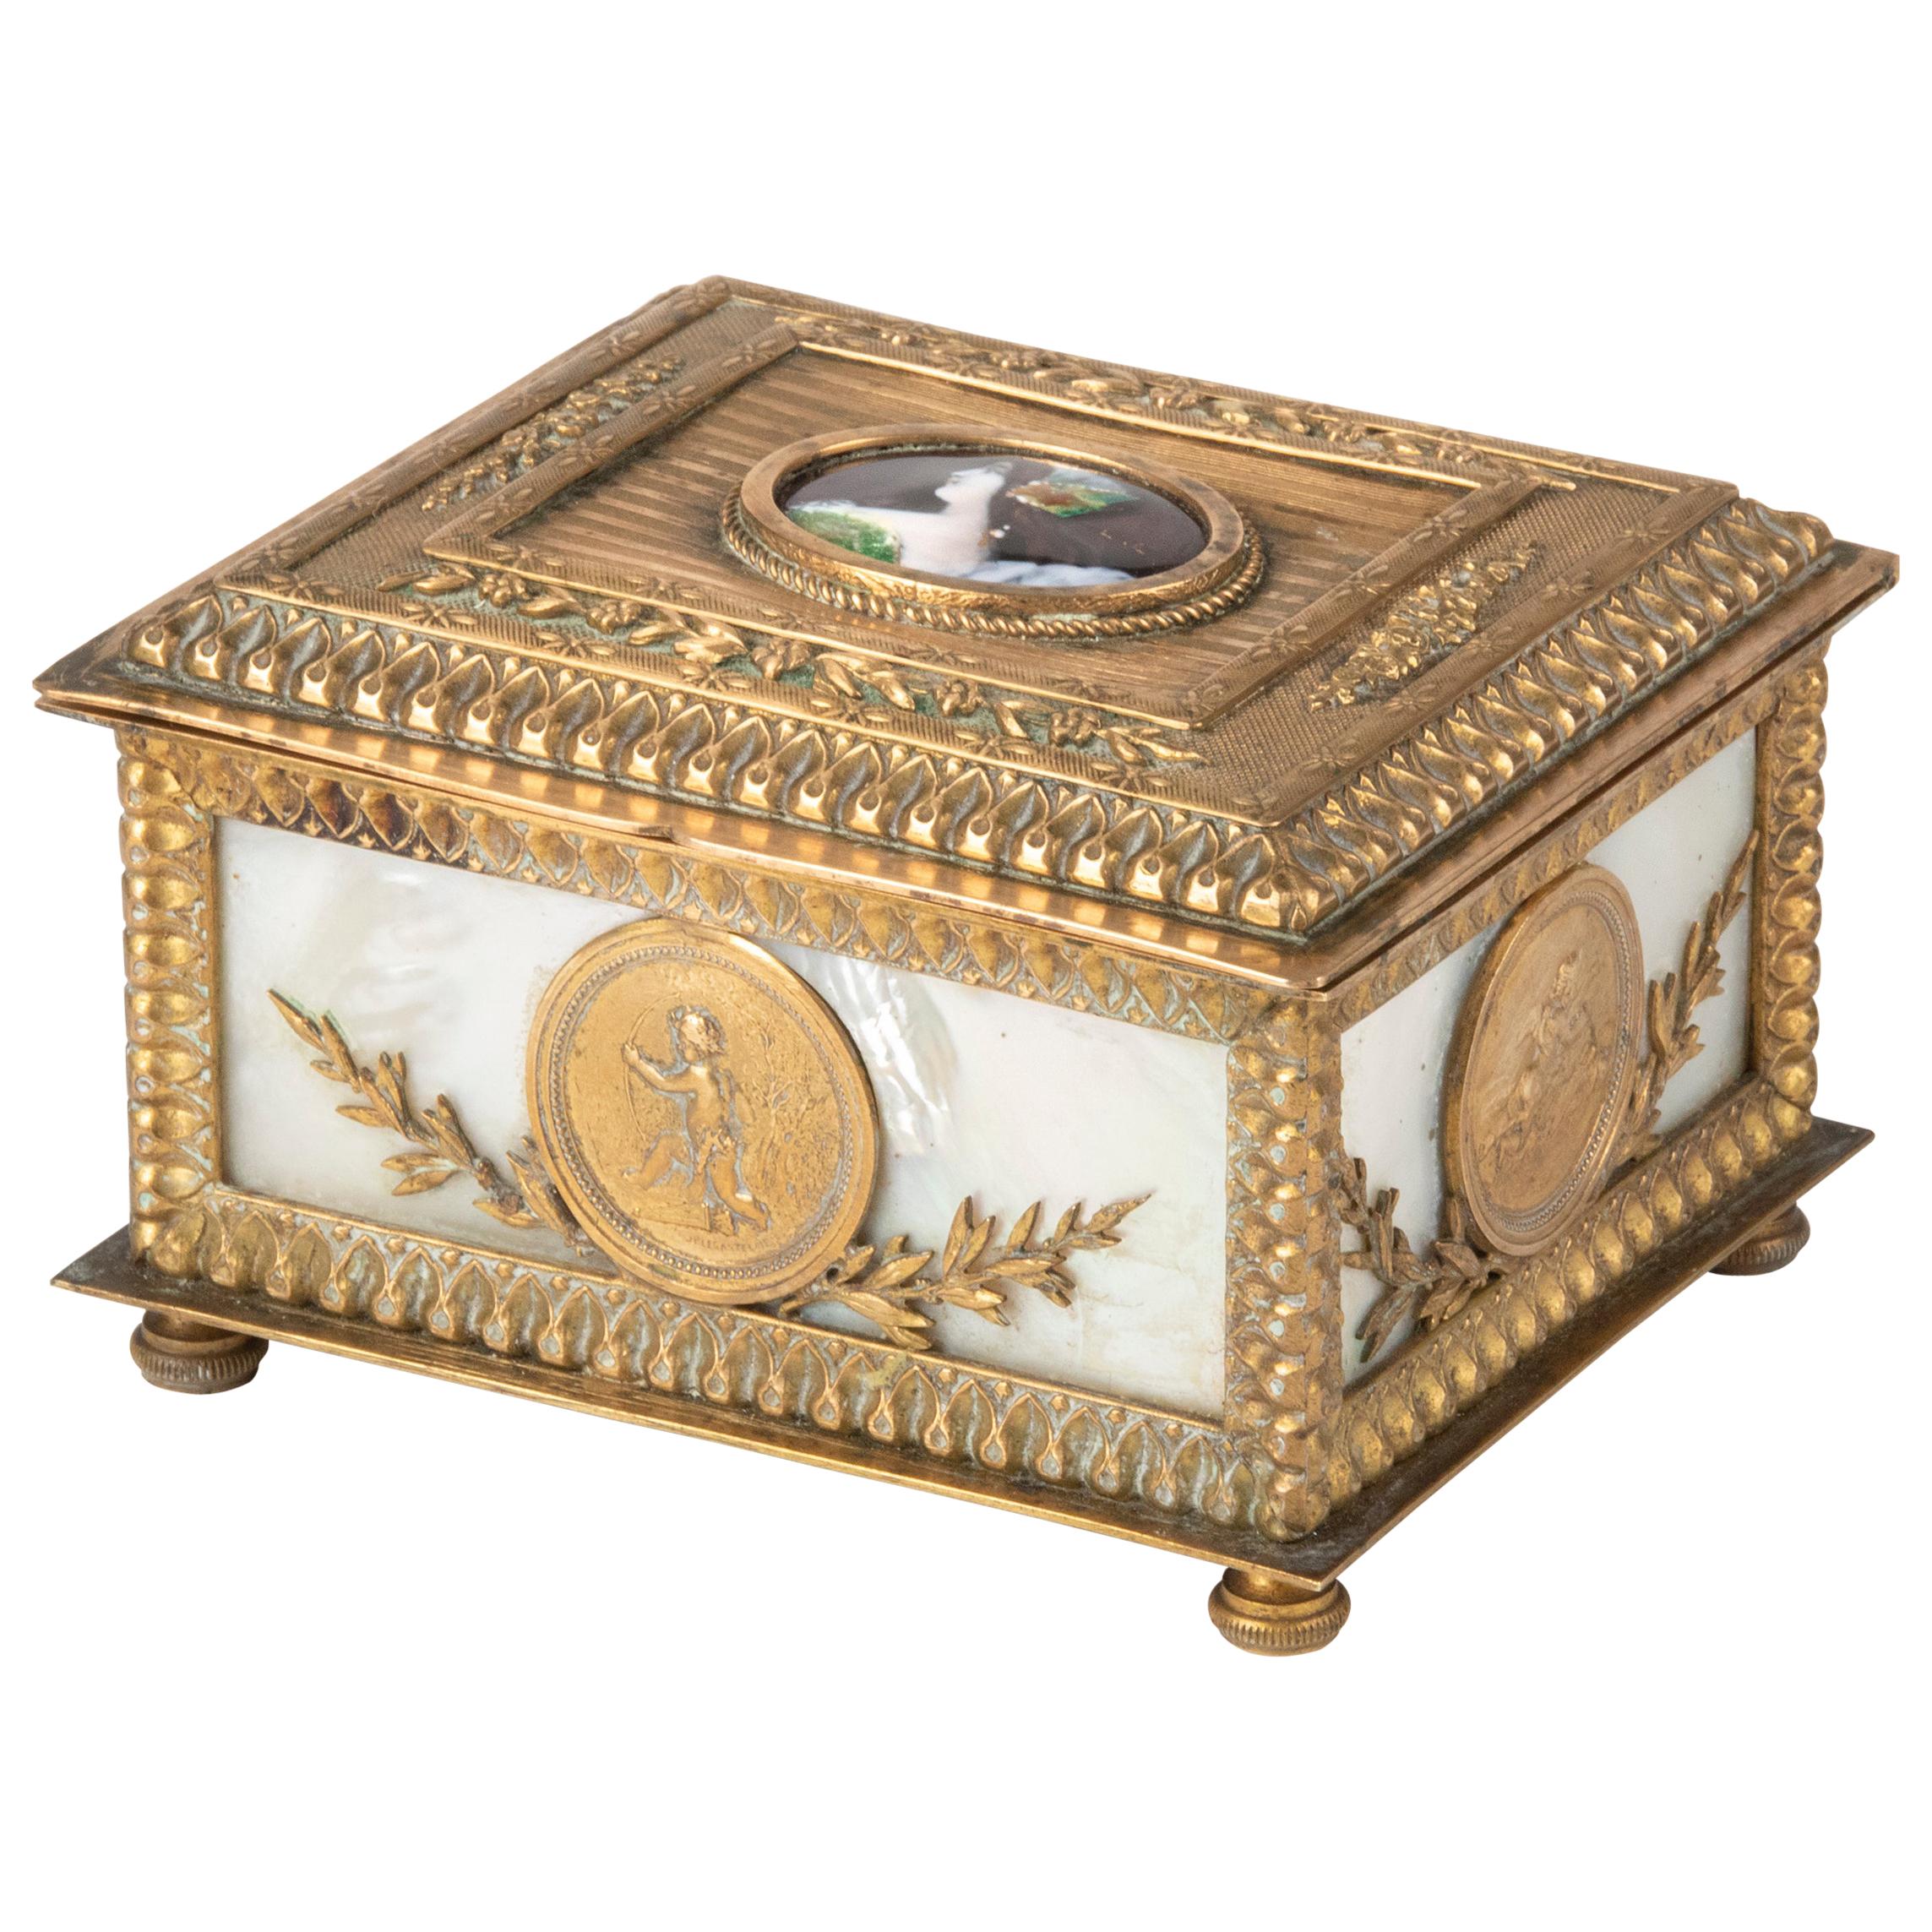 19th Century Jewelery Box by JP Legastelois, Bronze with Mother of Pearl